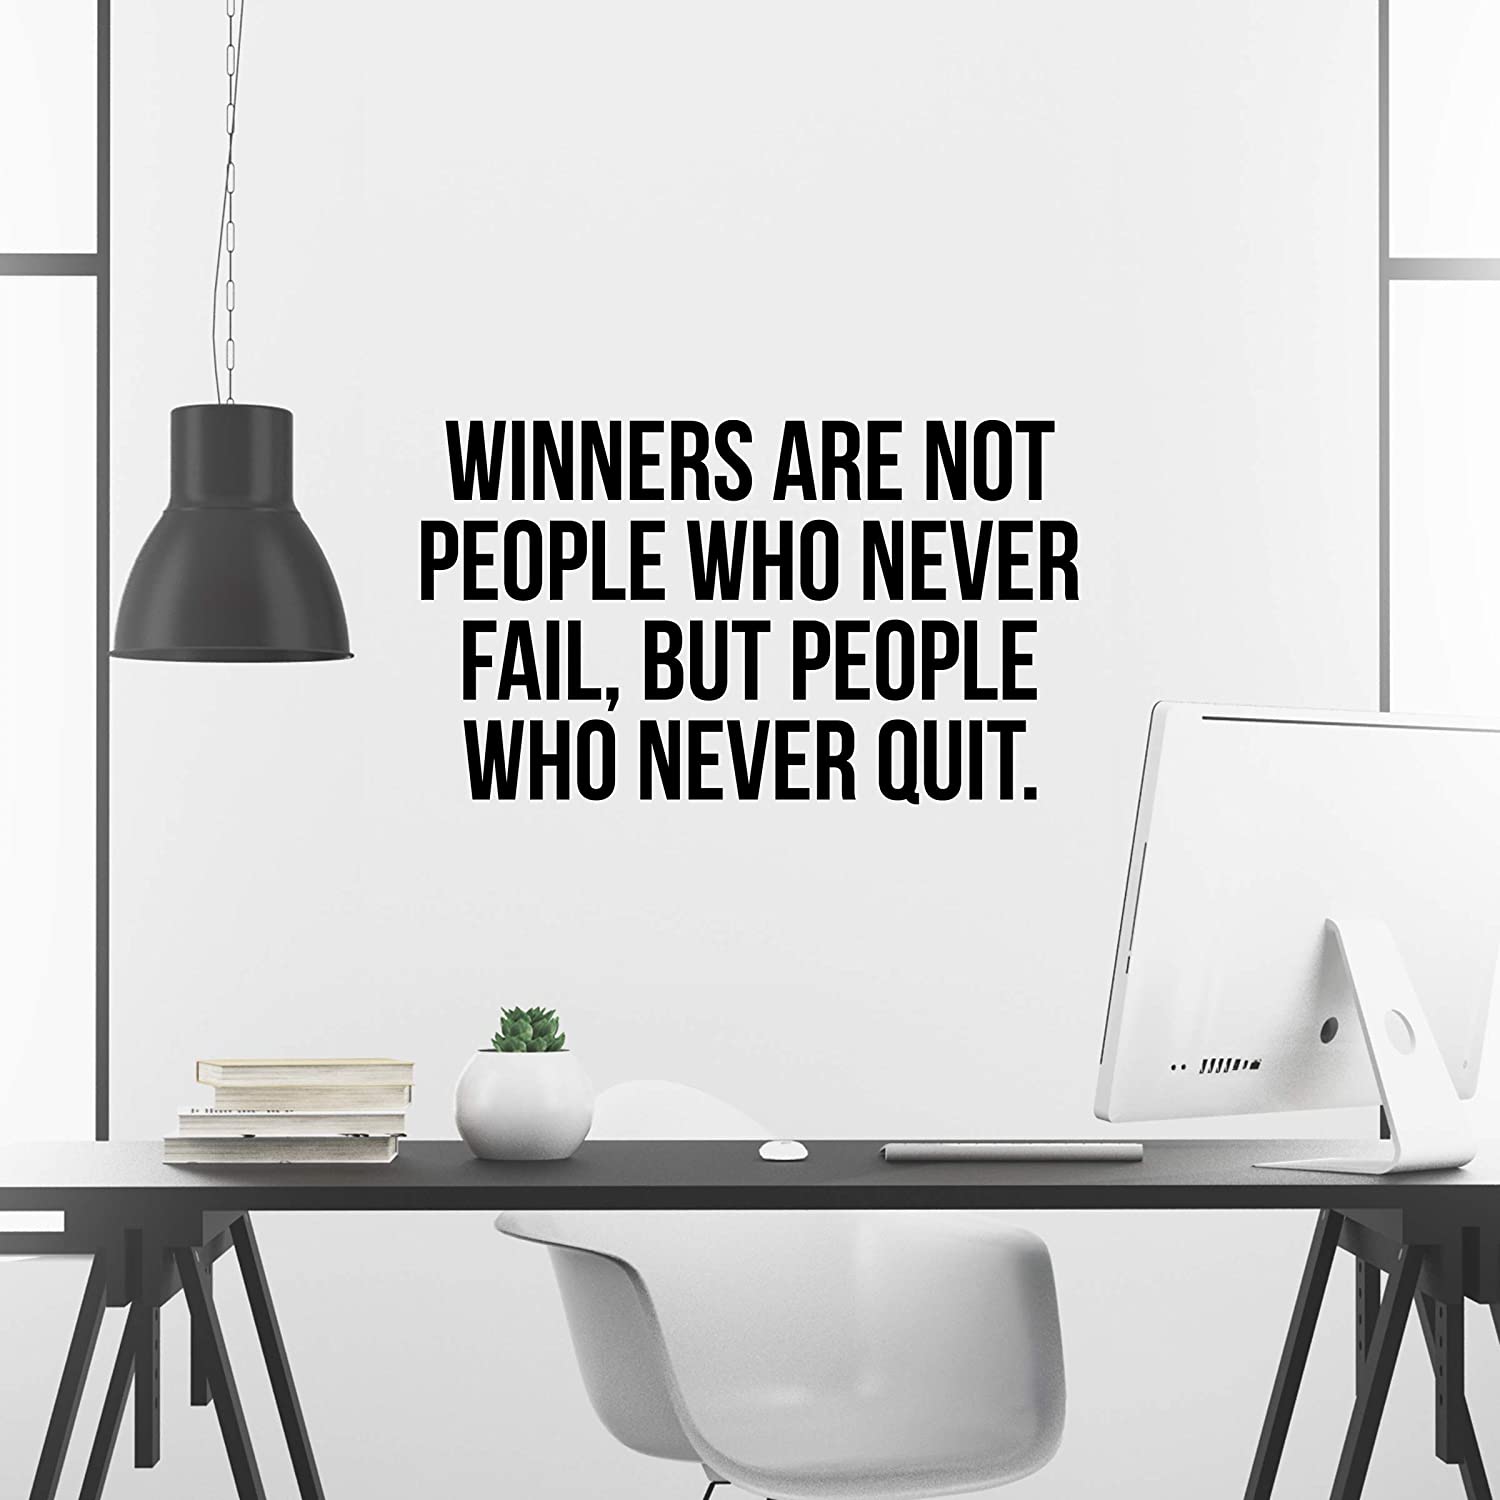 Winners Are Not Those Who Never Fail but Those Who Never Quit